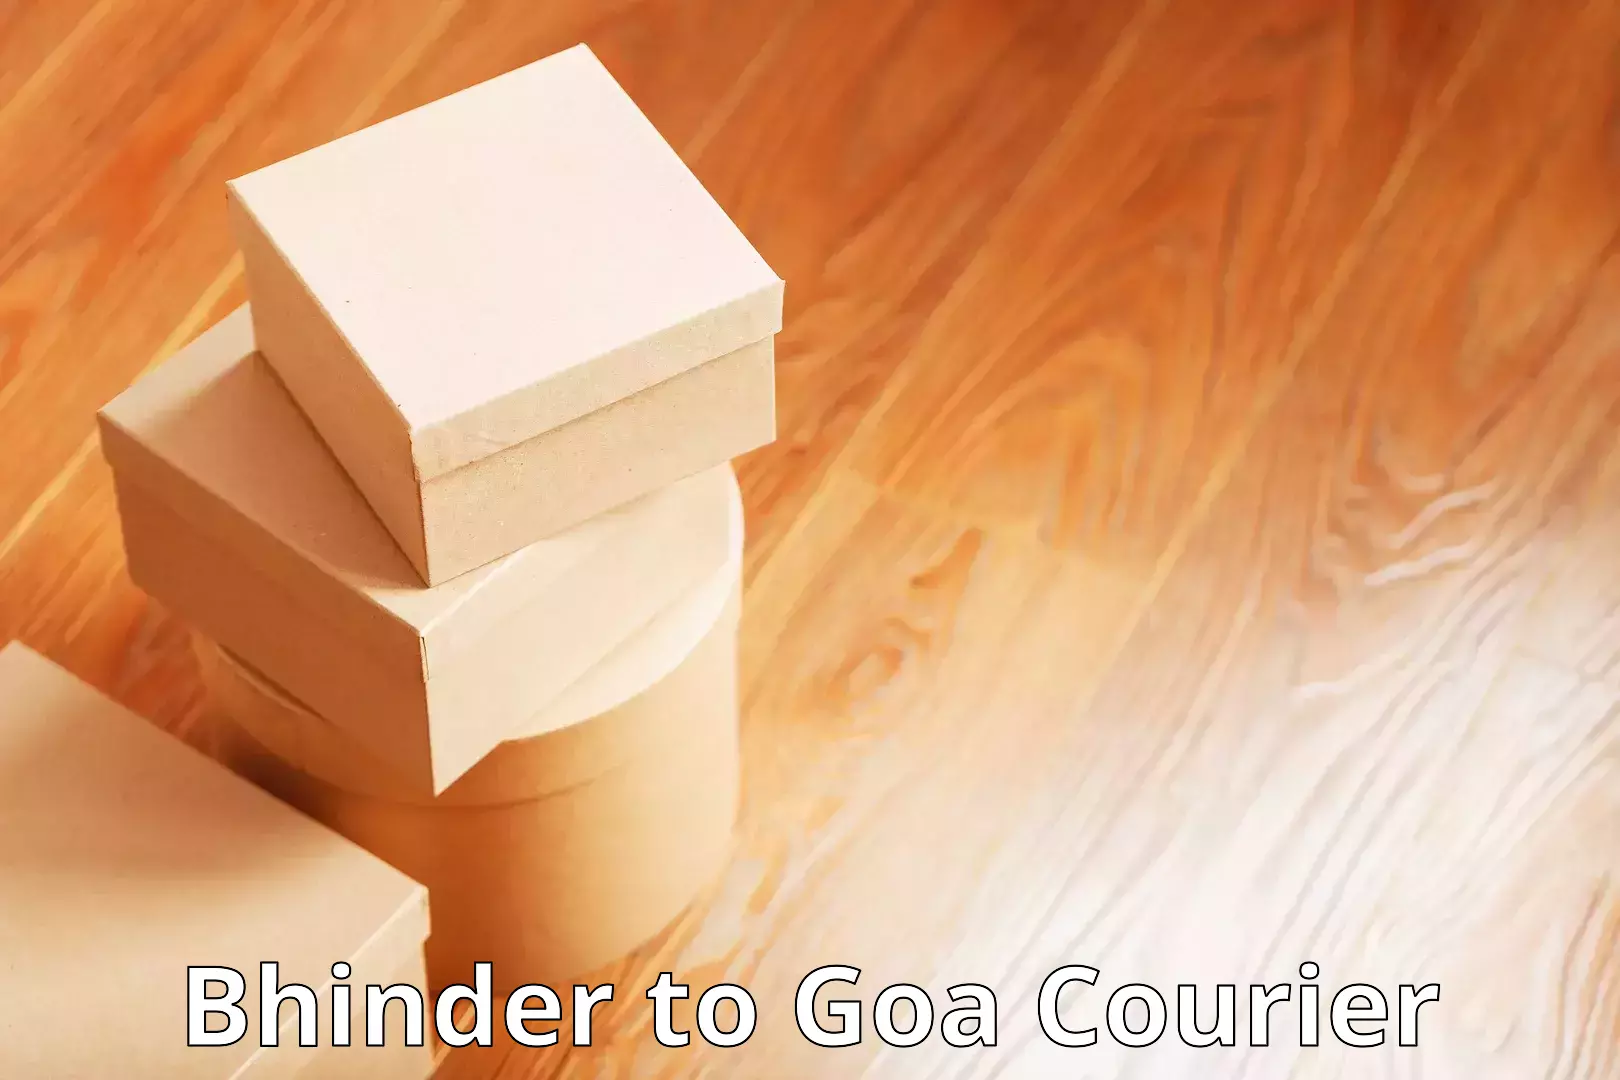 Reliable courier service Bhinder to Goa